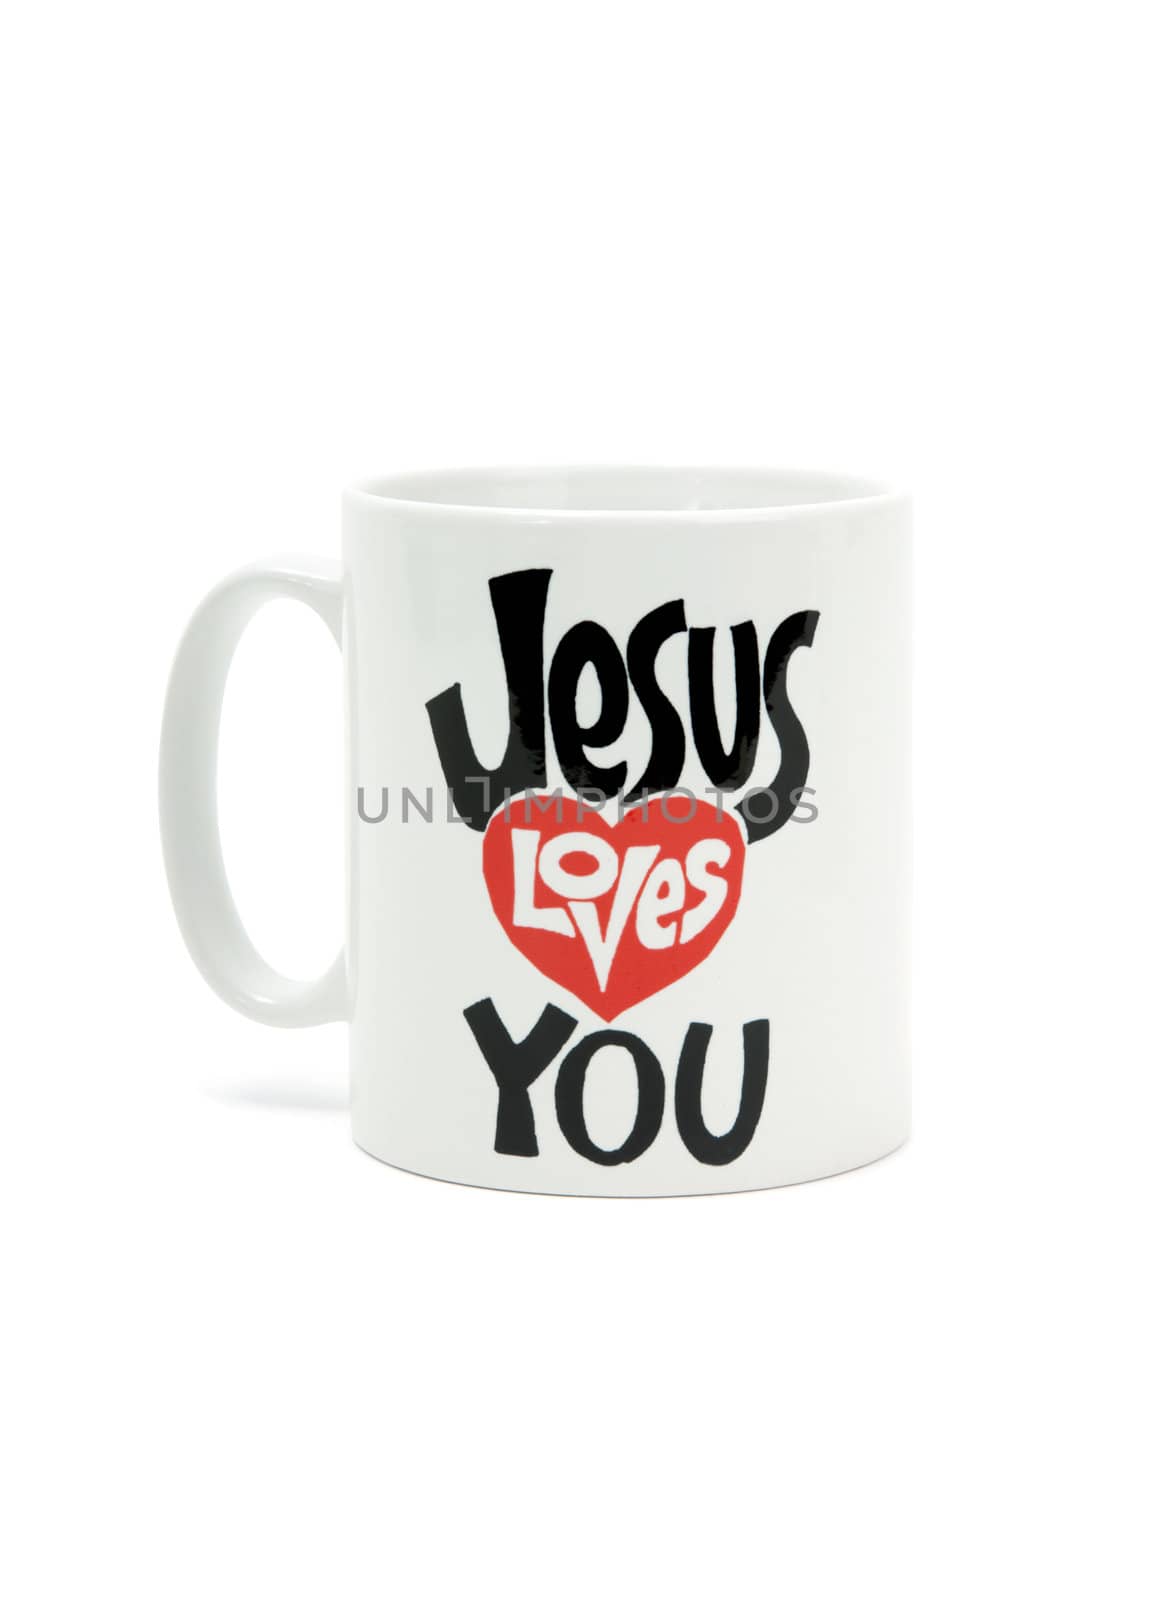 Coffee mug with jesus loves you message